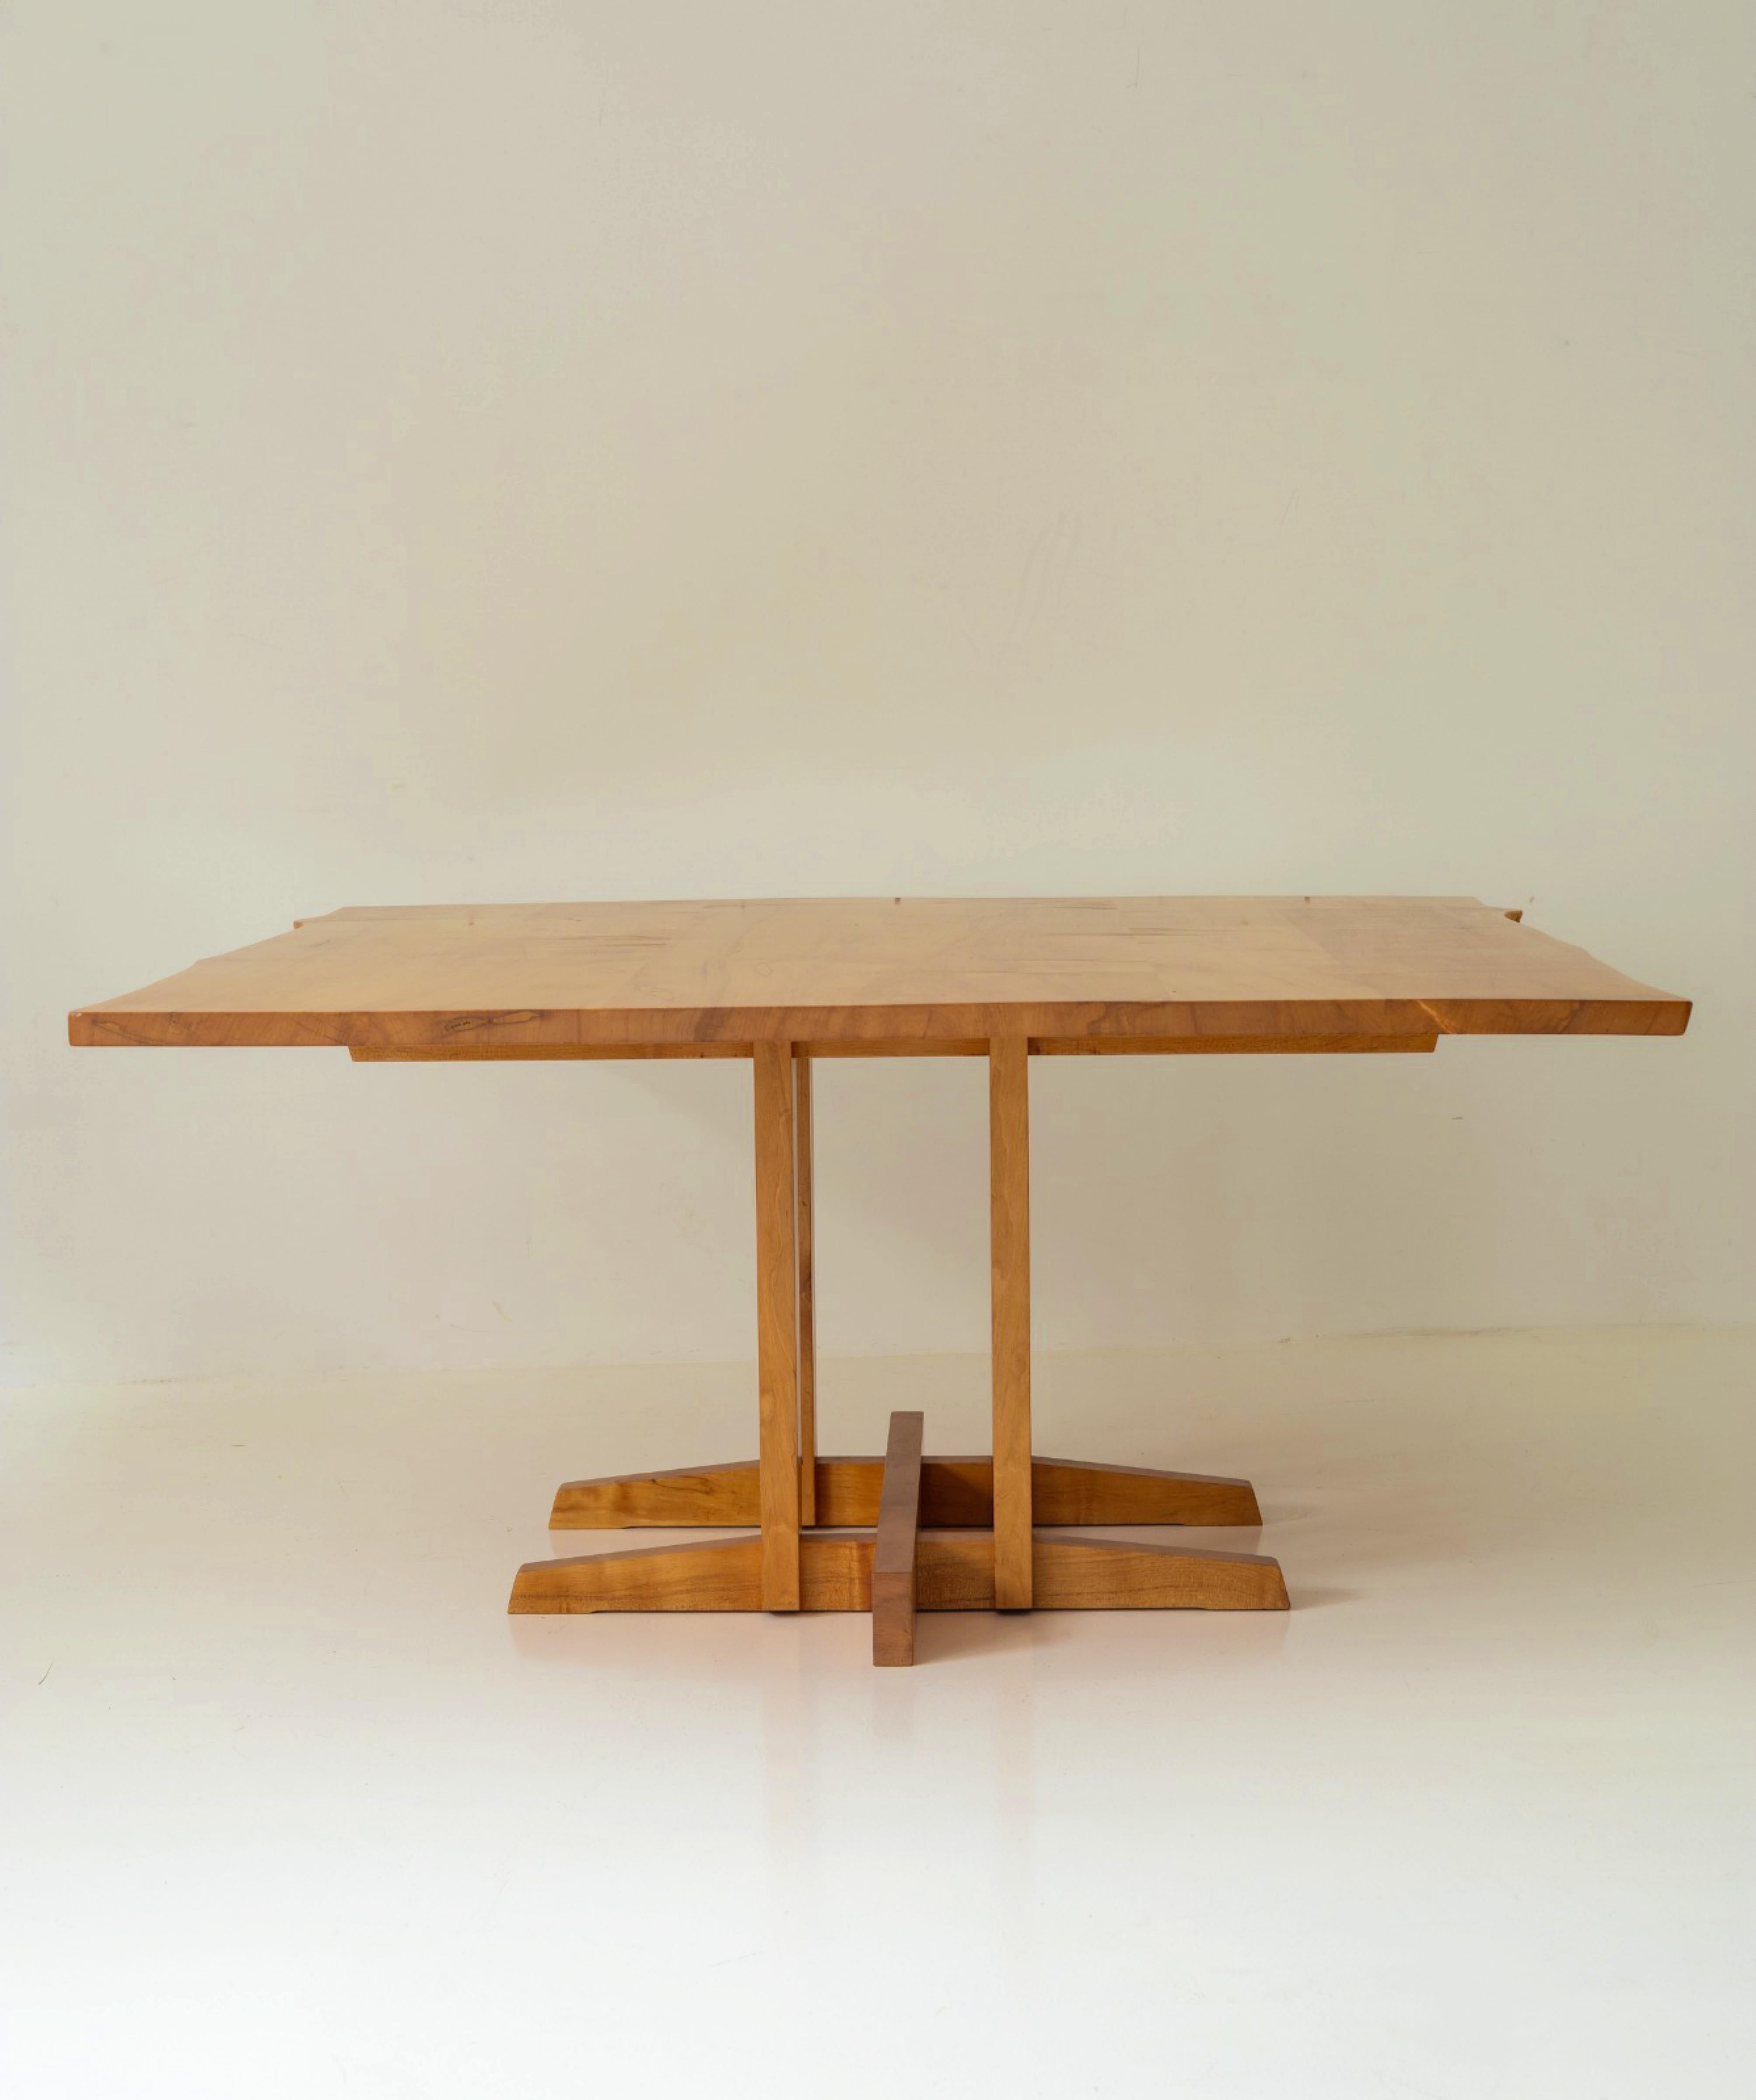 A rare Frenchman's Cove dining table, in maple wood with free-edge top, made by George Nakashima in 1980

Height 73.5cm, the top basically 152.5cm square but slightly wider in places where the free edge protrudes.  In very good condition, with